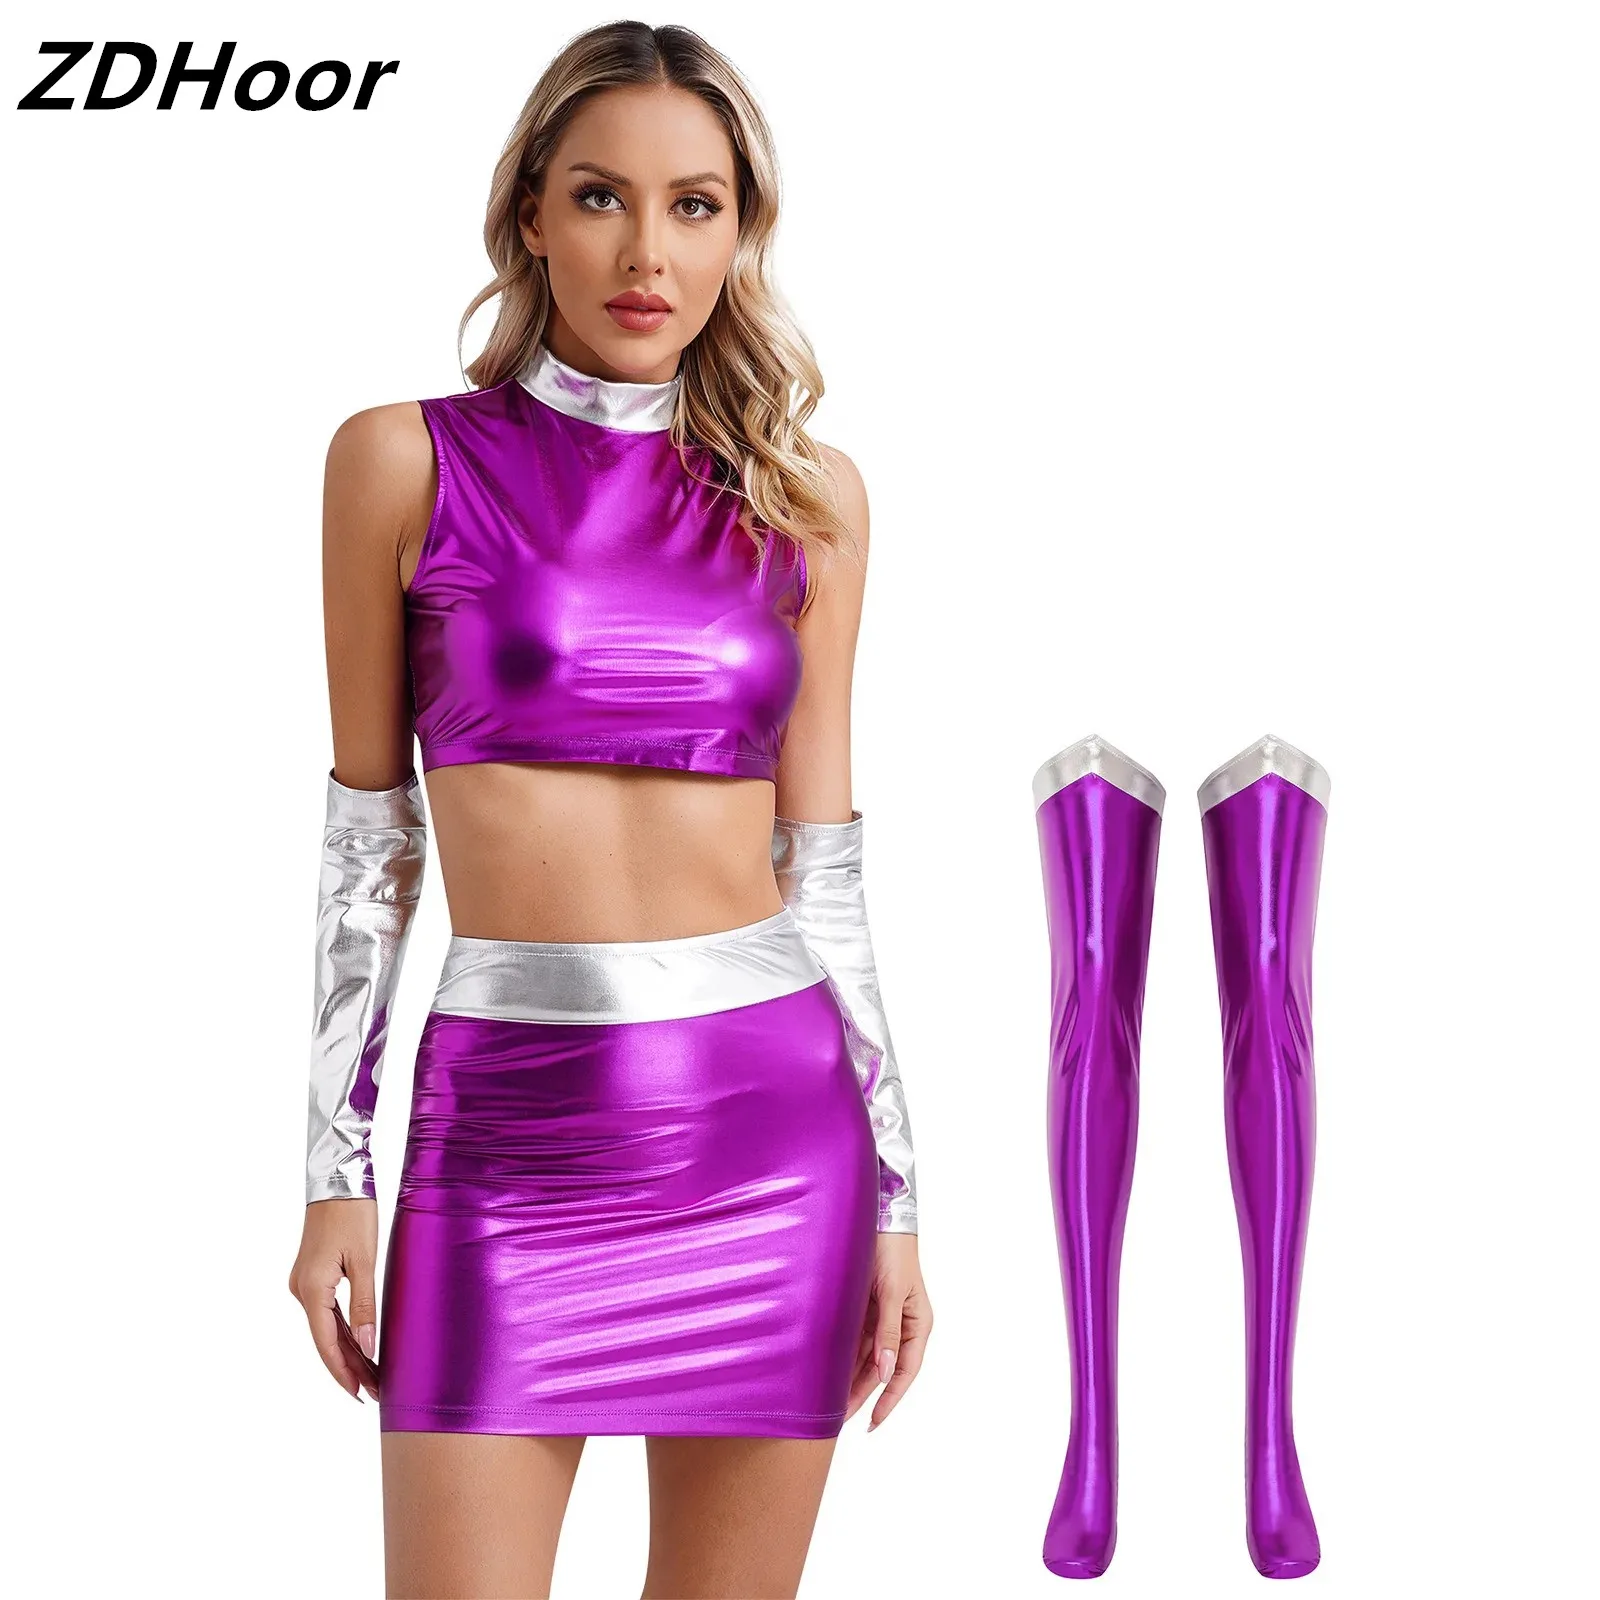 

Womens Cosplay Costumes Outfit Space Themed Sleeveless Crop Top Sleeves Bodycon Skirt And Thigh High Stockings Halloween